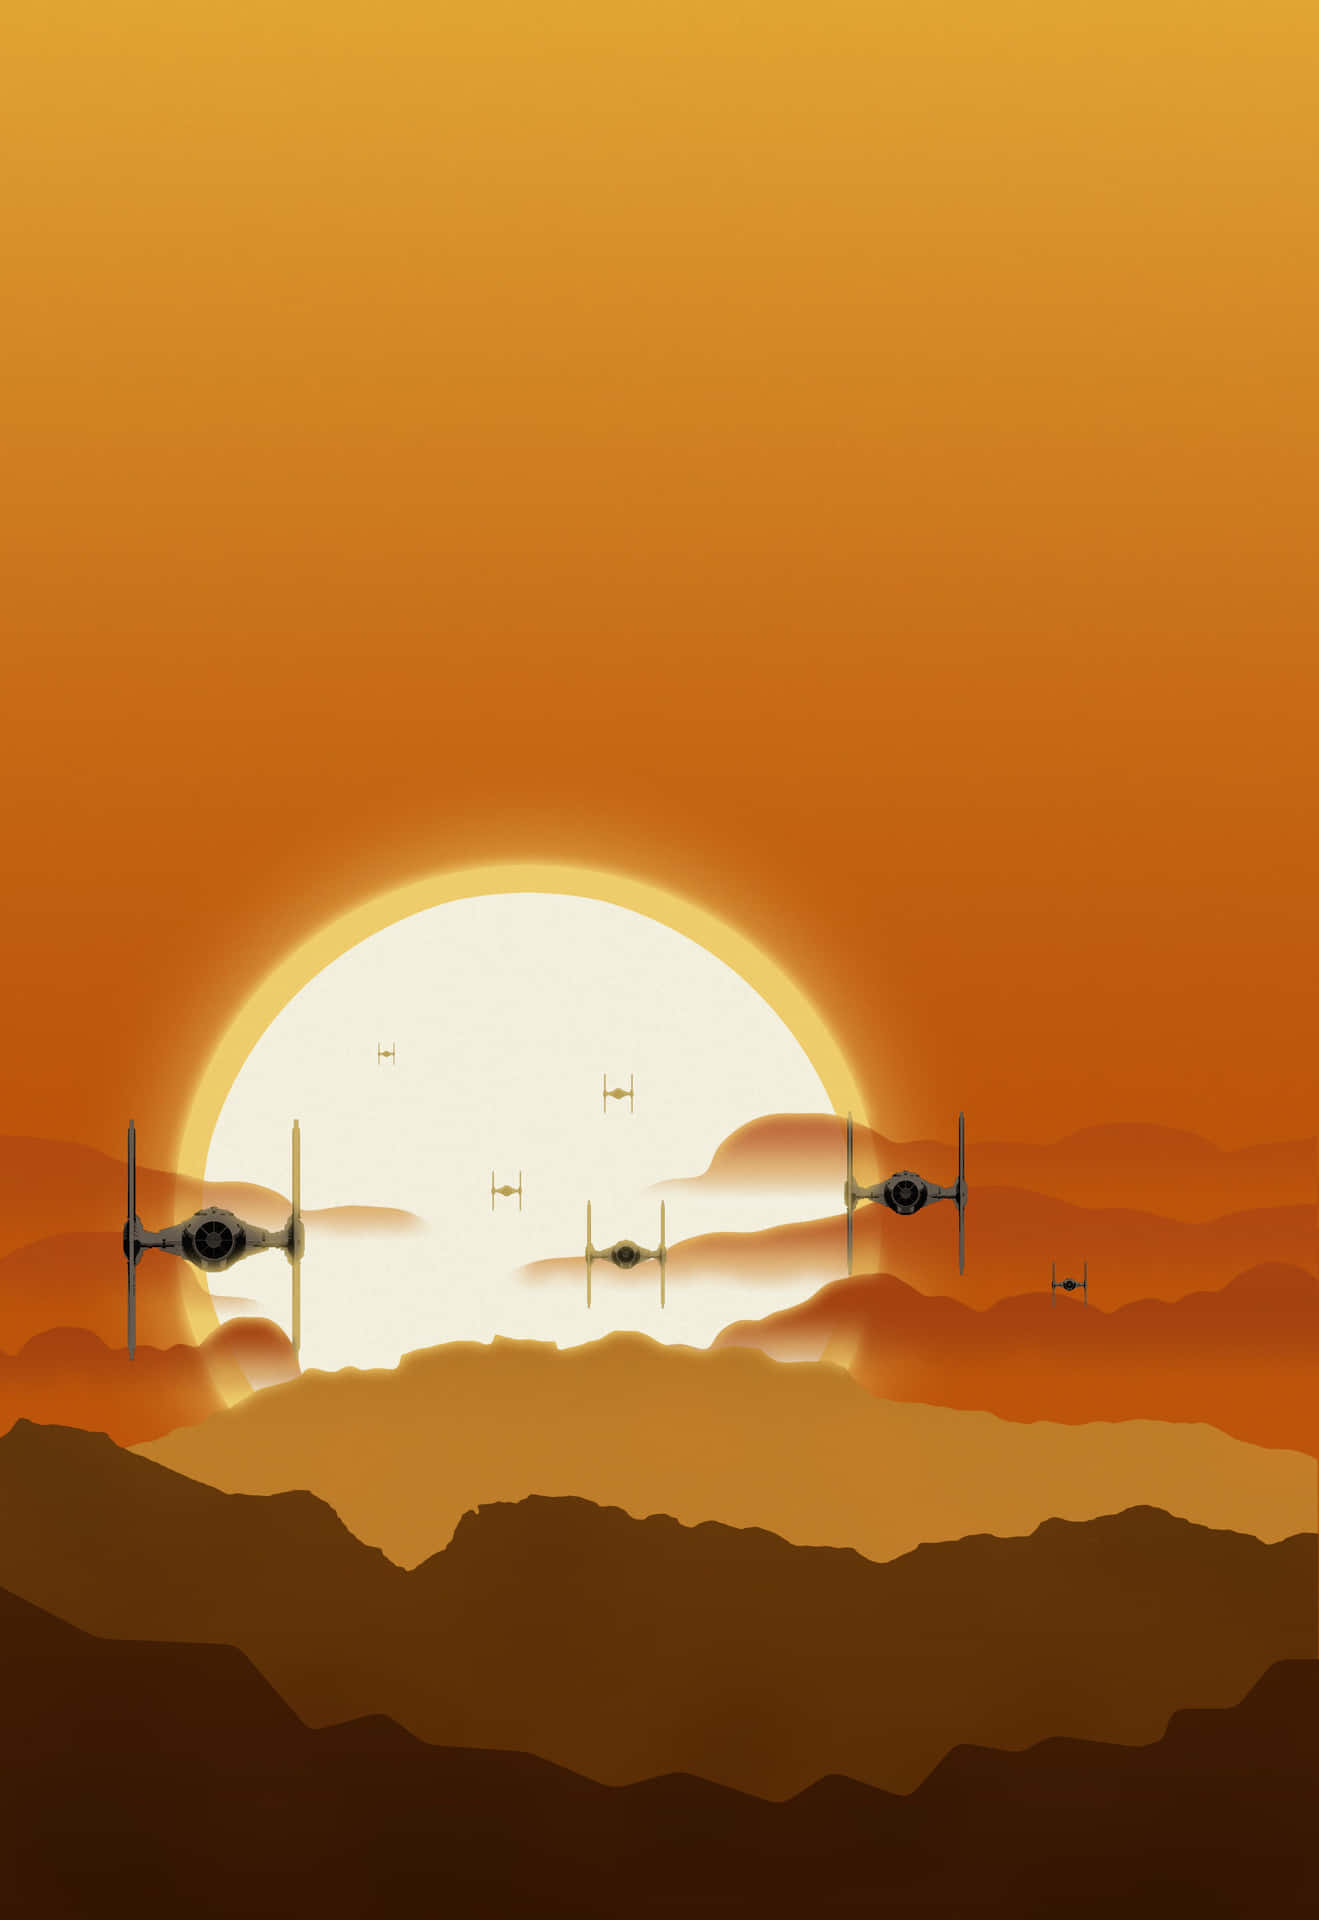 10 Tatooine Star Wars HD Wallpapers and Backgrounds